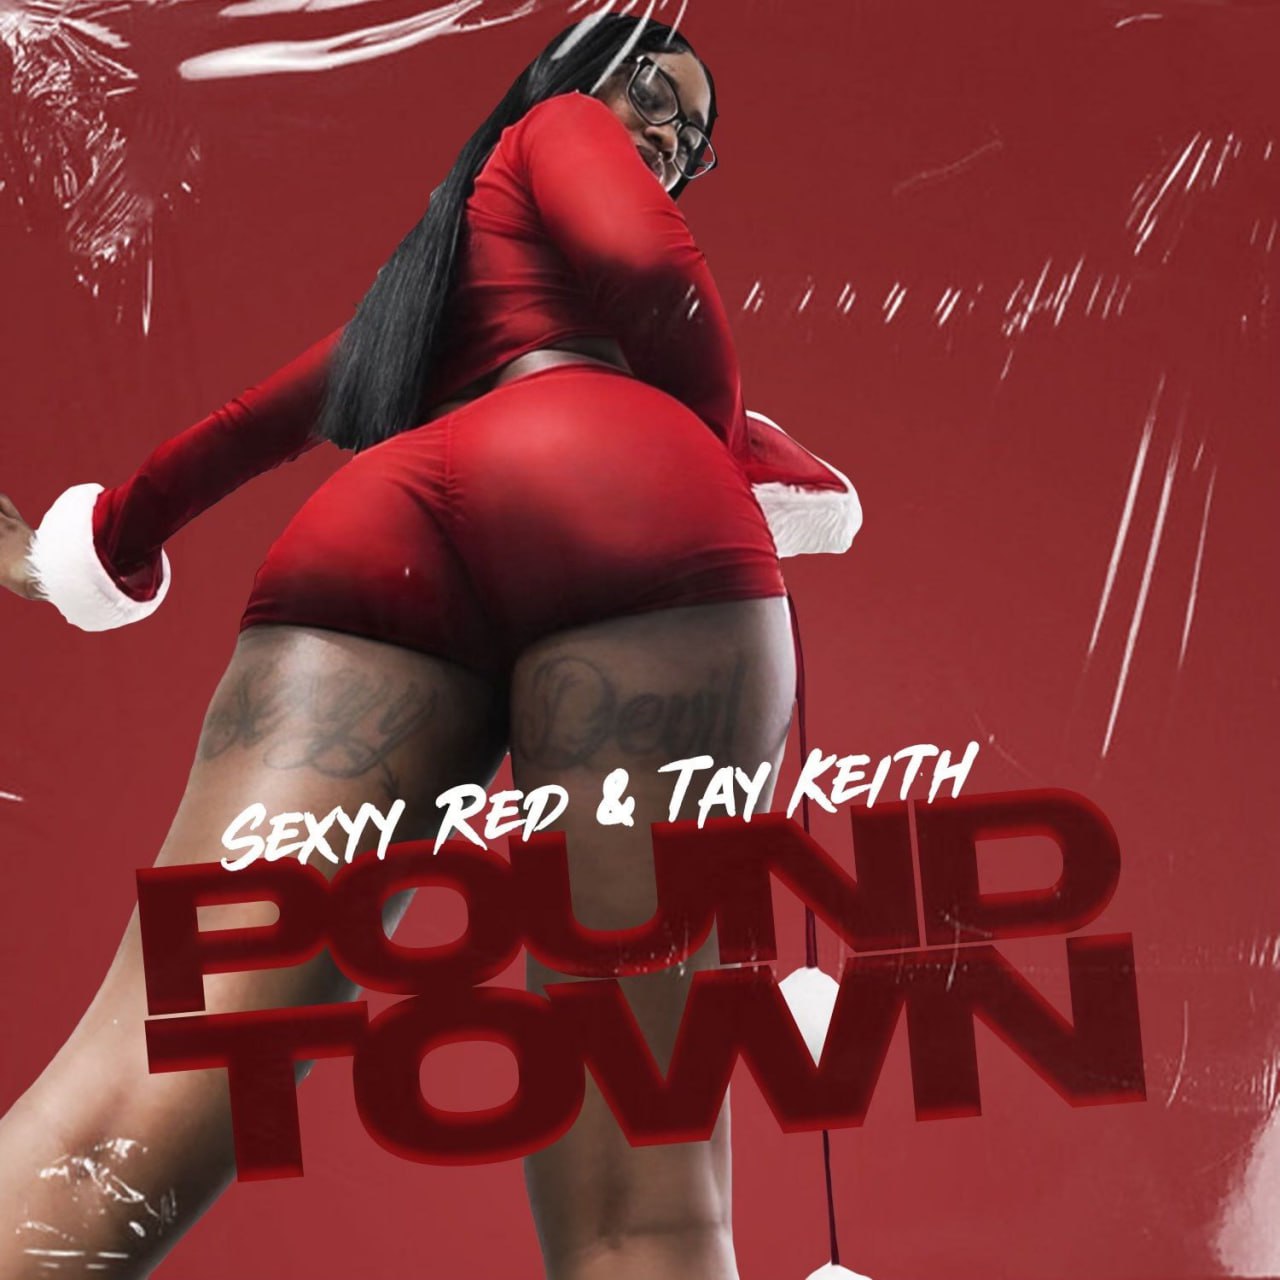 Pound Town - Sexyy Red ft. Tay Keith